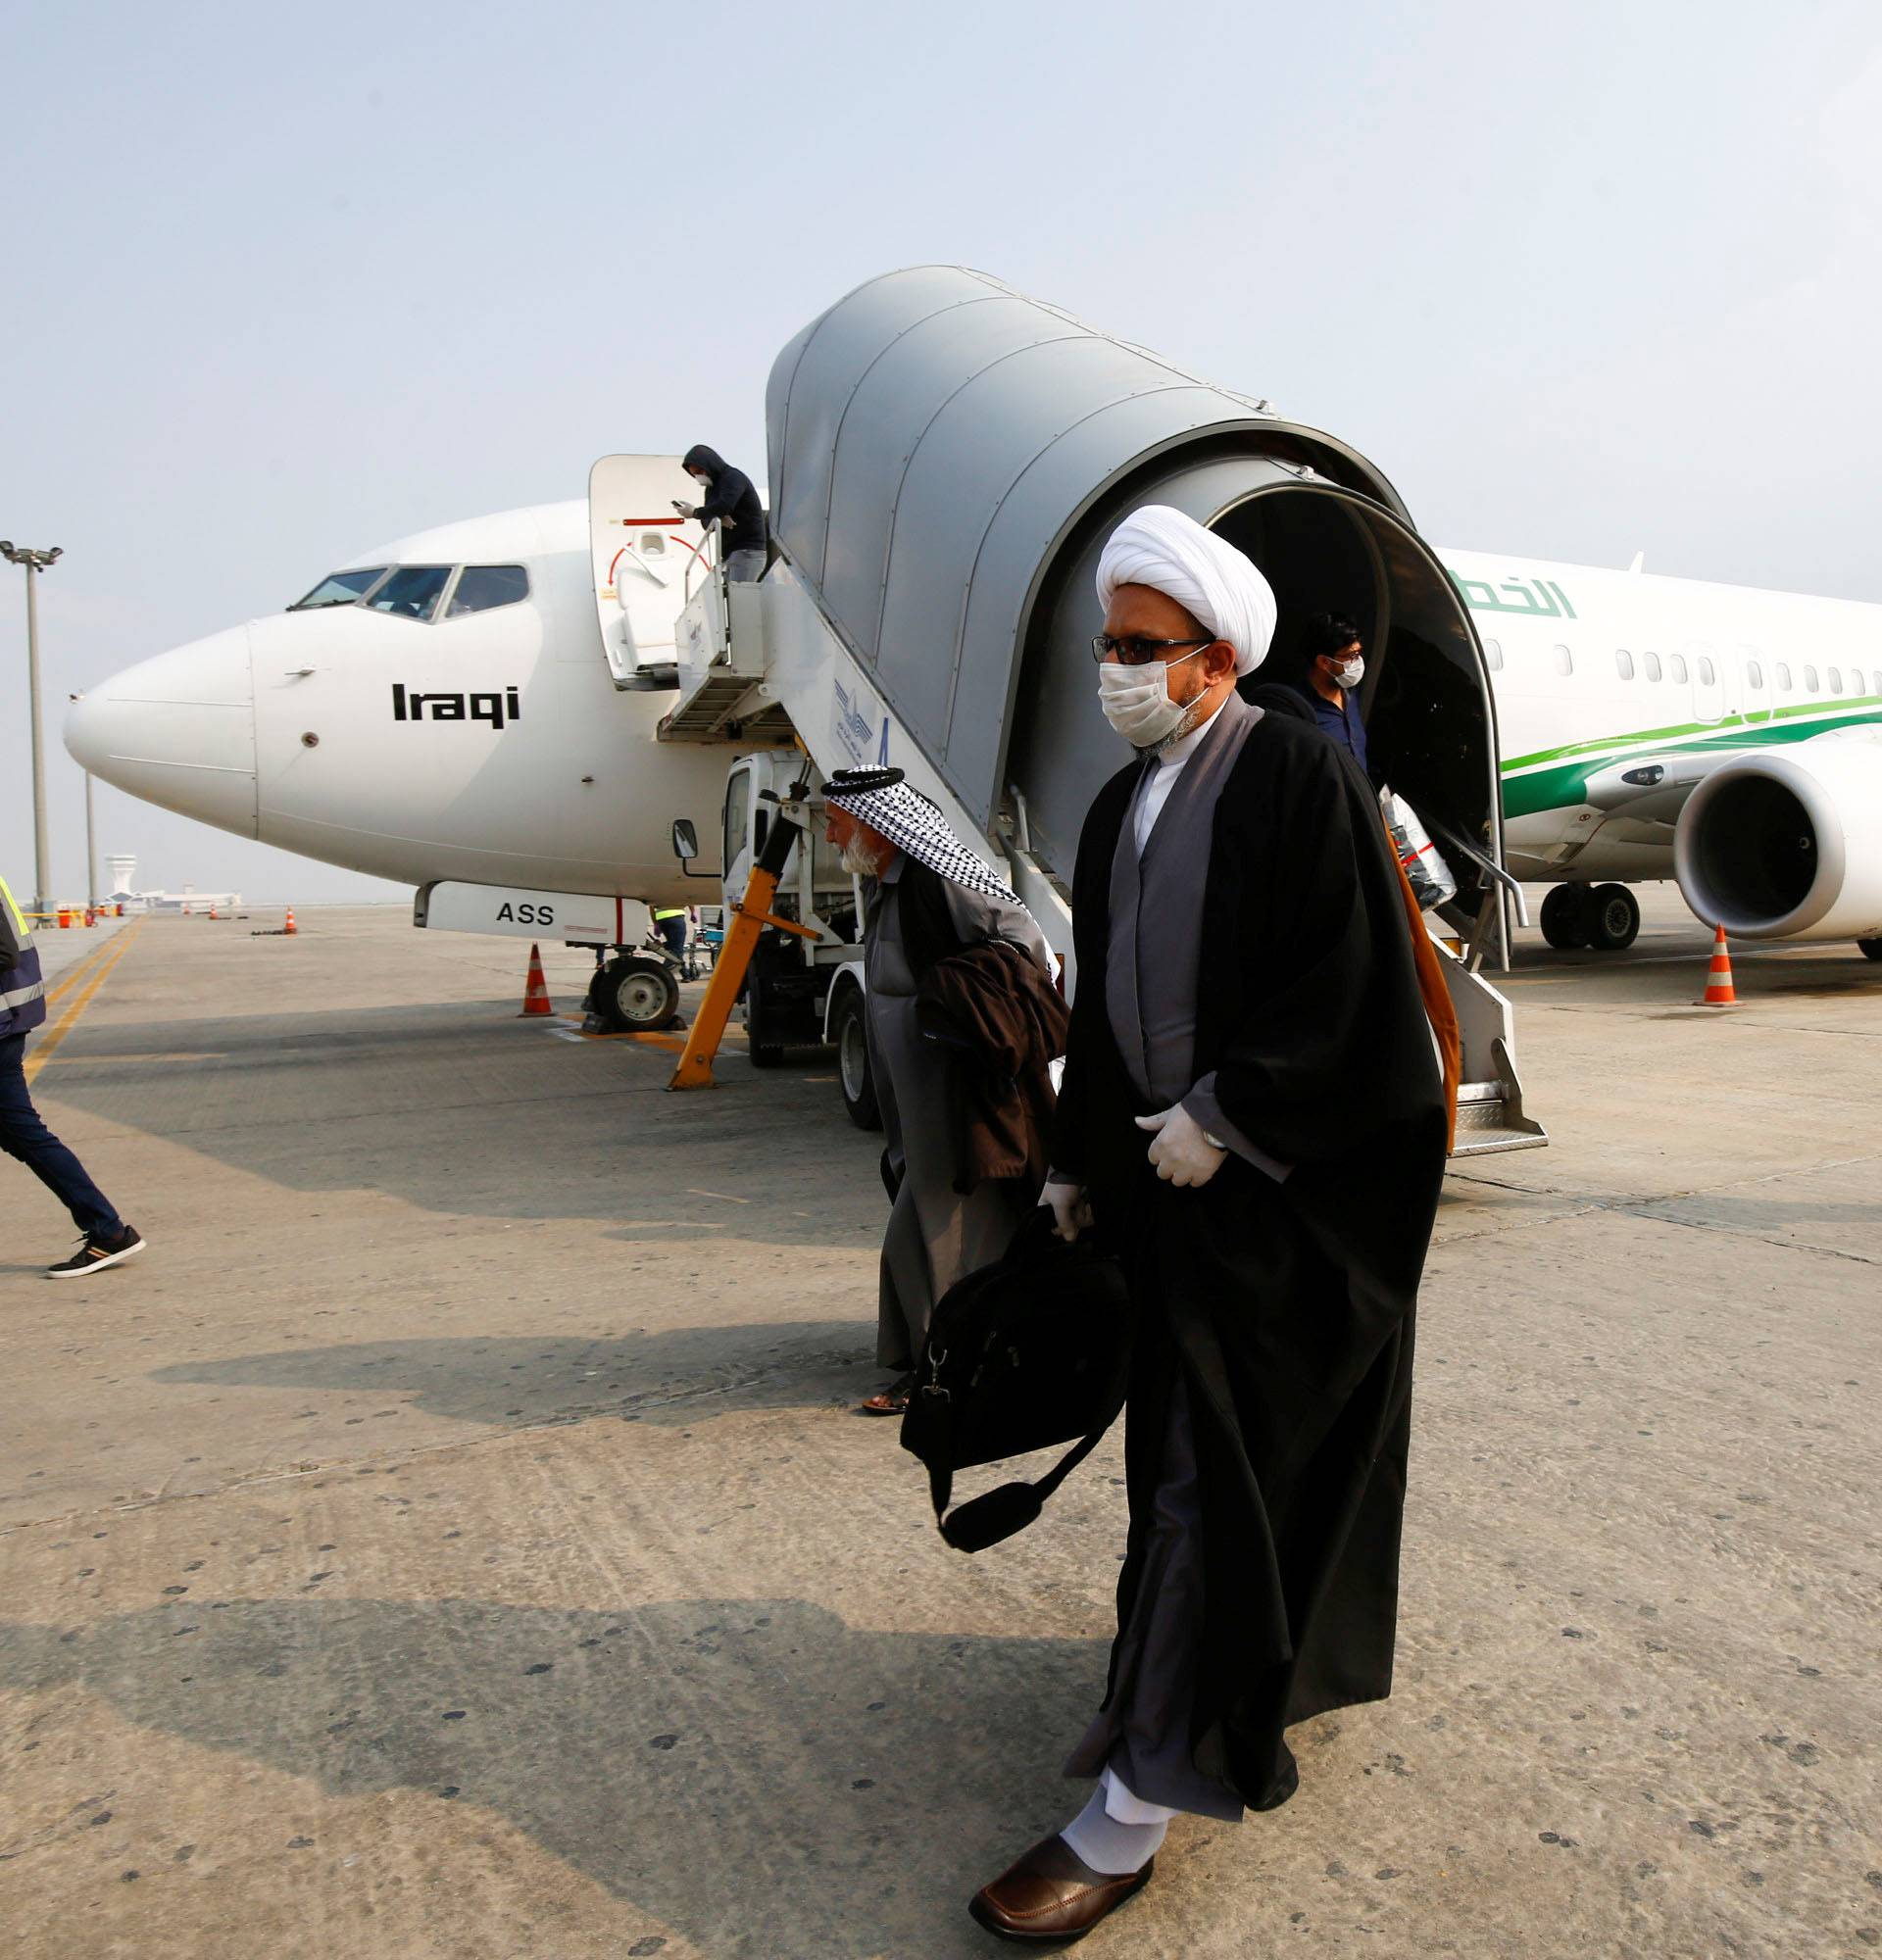 A cleric man wears a protective mask amid concerns over the coronavirus (COVID-19) spread, at Najaf airport in the holy city of Najaf